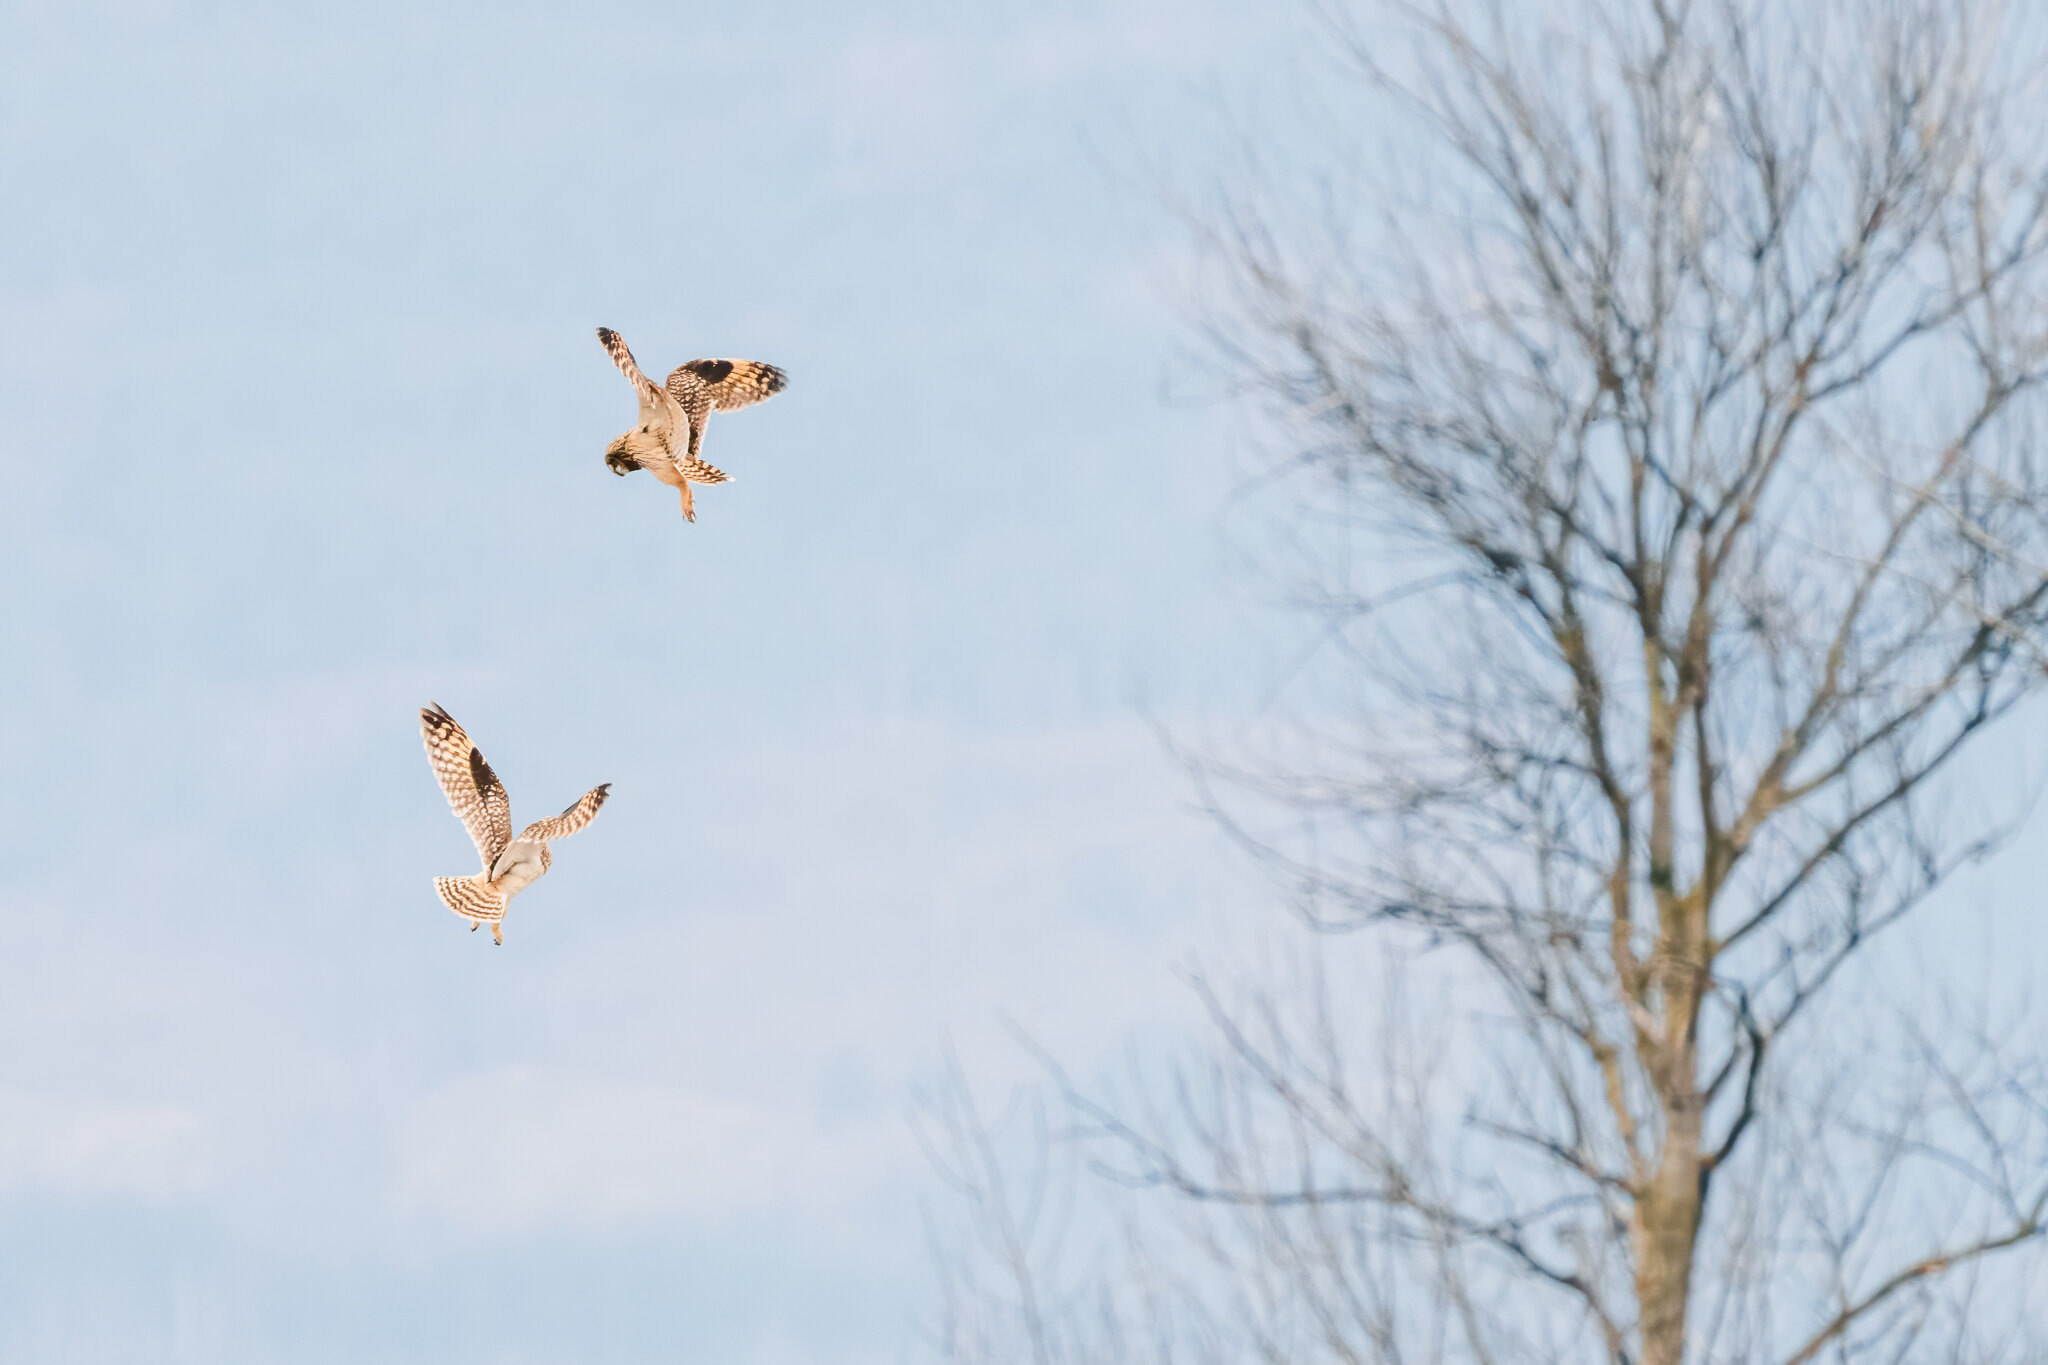 I could sit all day and watch the Short Eared Owls.  They are as fascinating as they are beautiful.  When they battle each other over territory, it's like a beautifully composed ballet. 

📷 @sonyalpha a7rV + 200-600 G

#clickcommunity #clickproelite